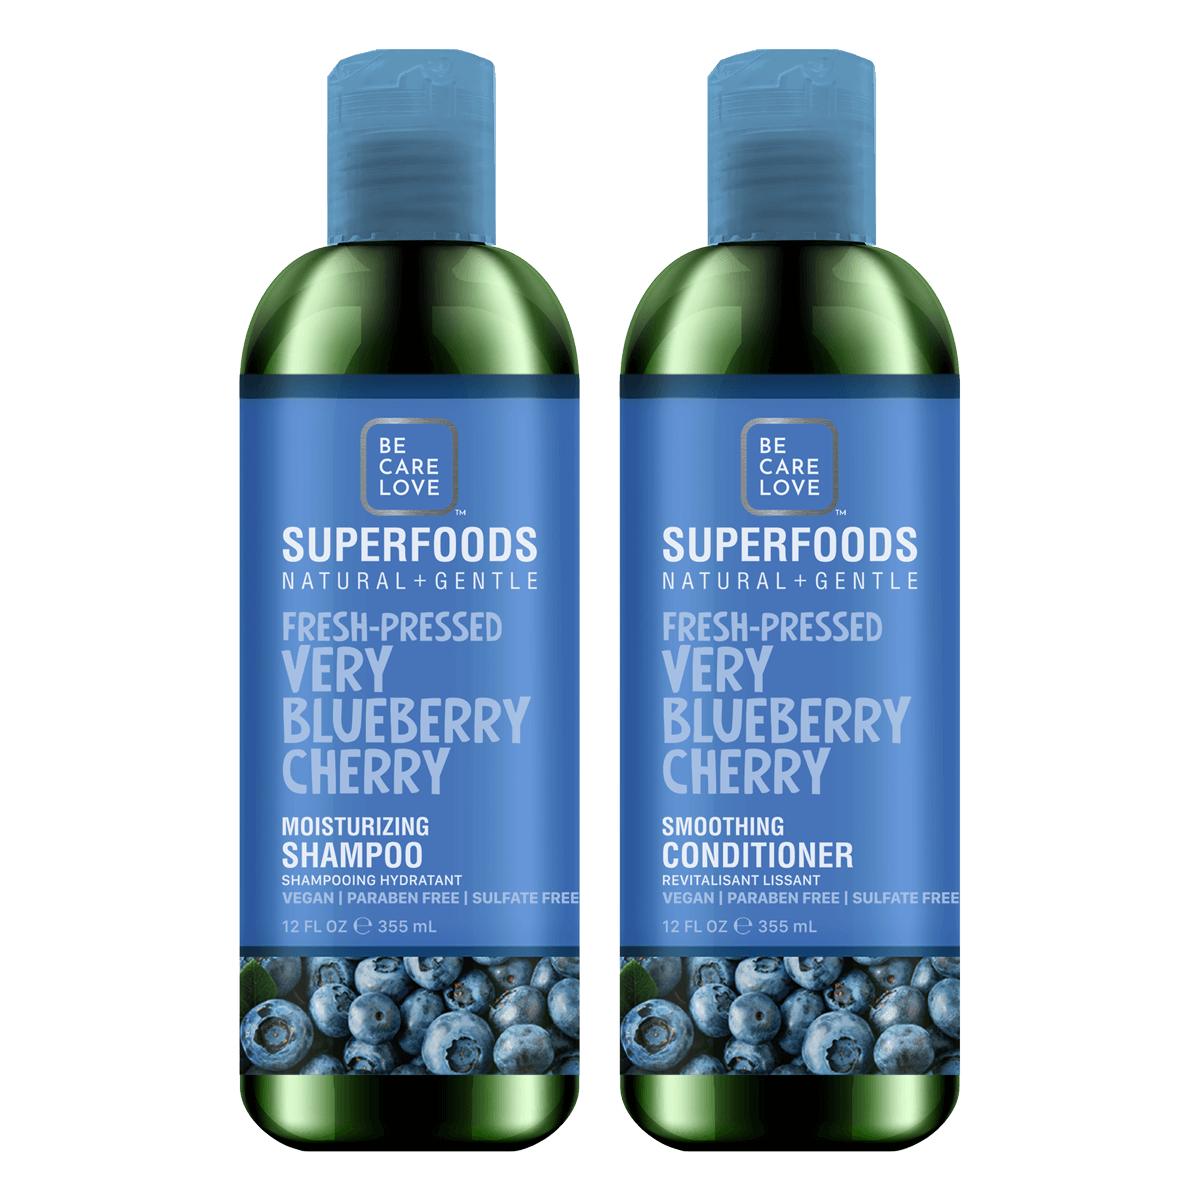 BCL Superfoods Natural + Gentle Moisturizing Shampoo & Conditioner – Beauty Supply